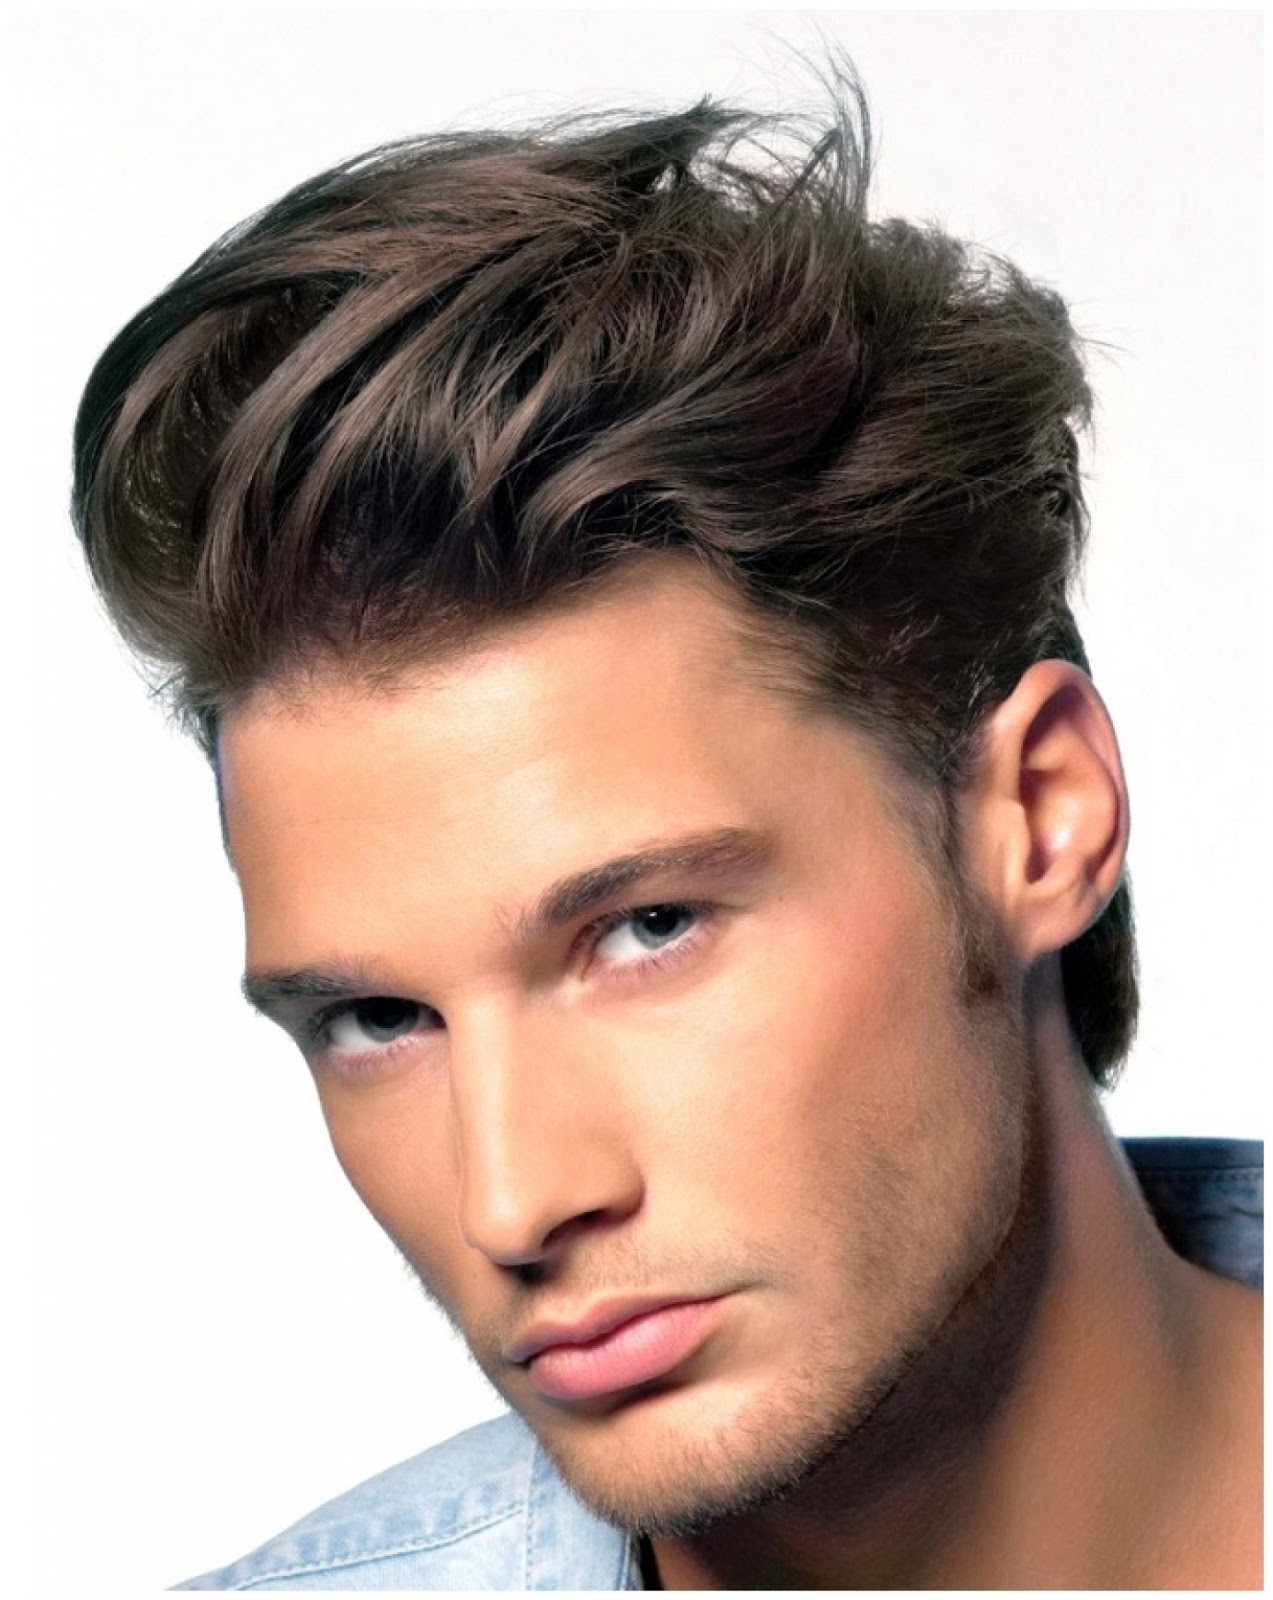 Undercut Hairstyle For Men
 The Undercut e The Best Hairstyle For Men